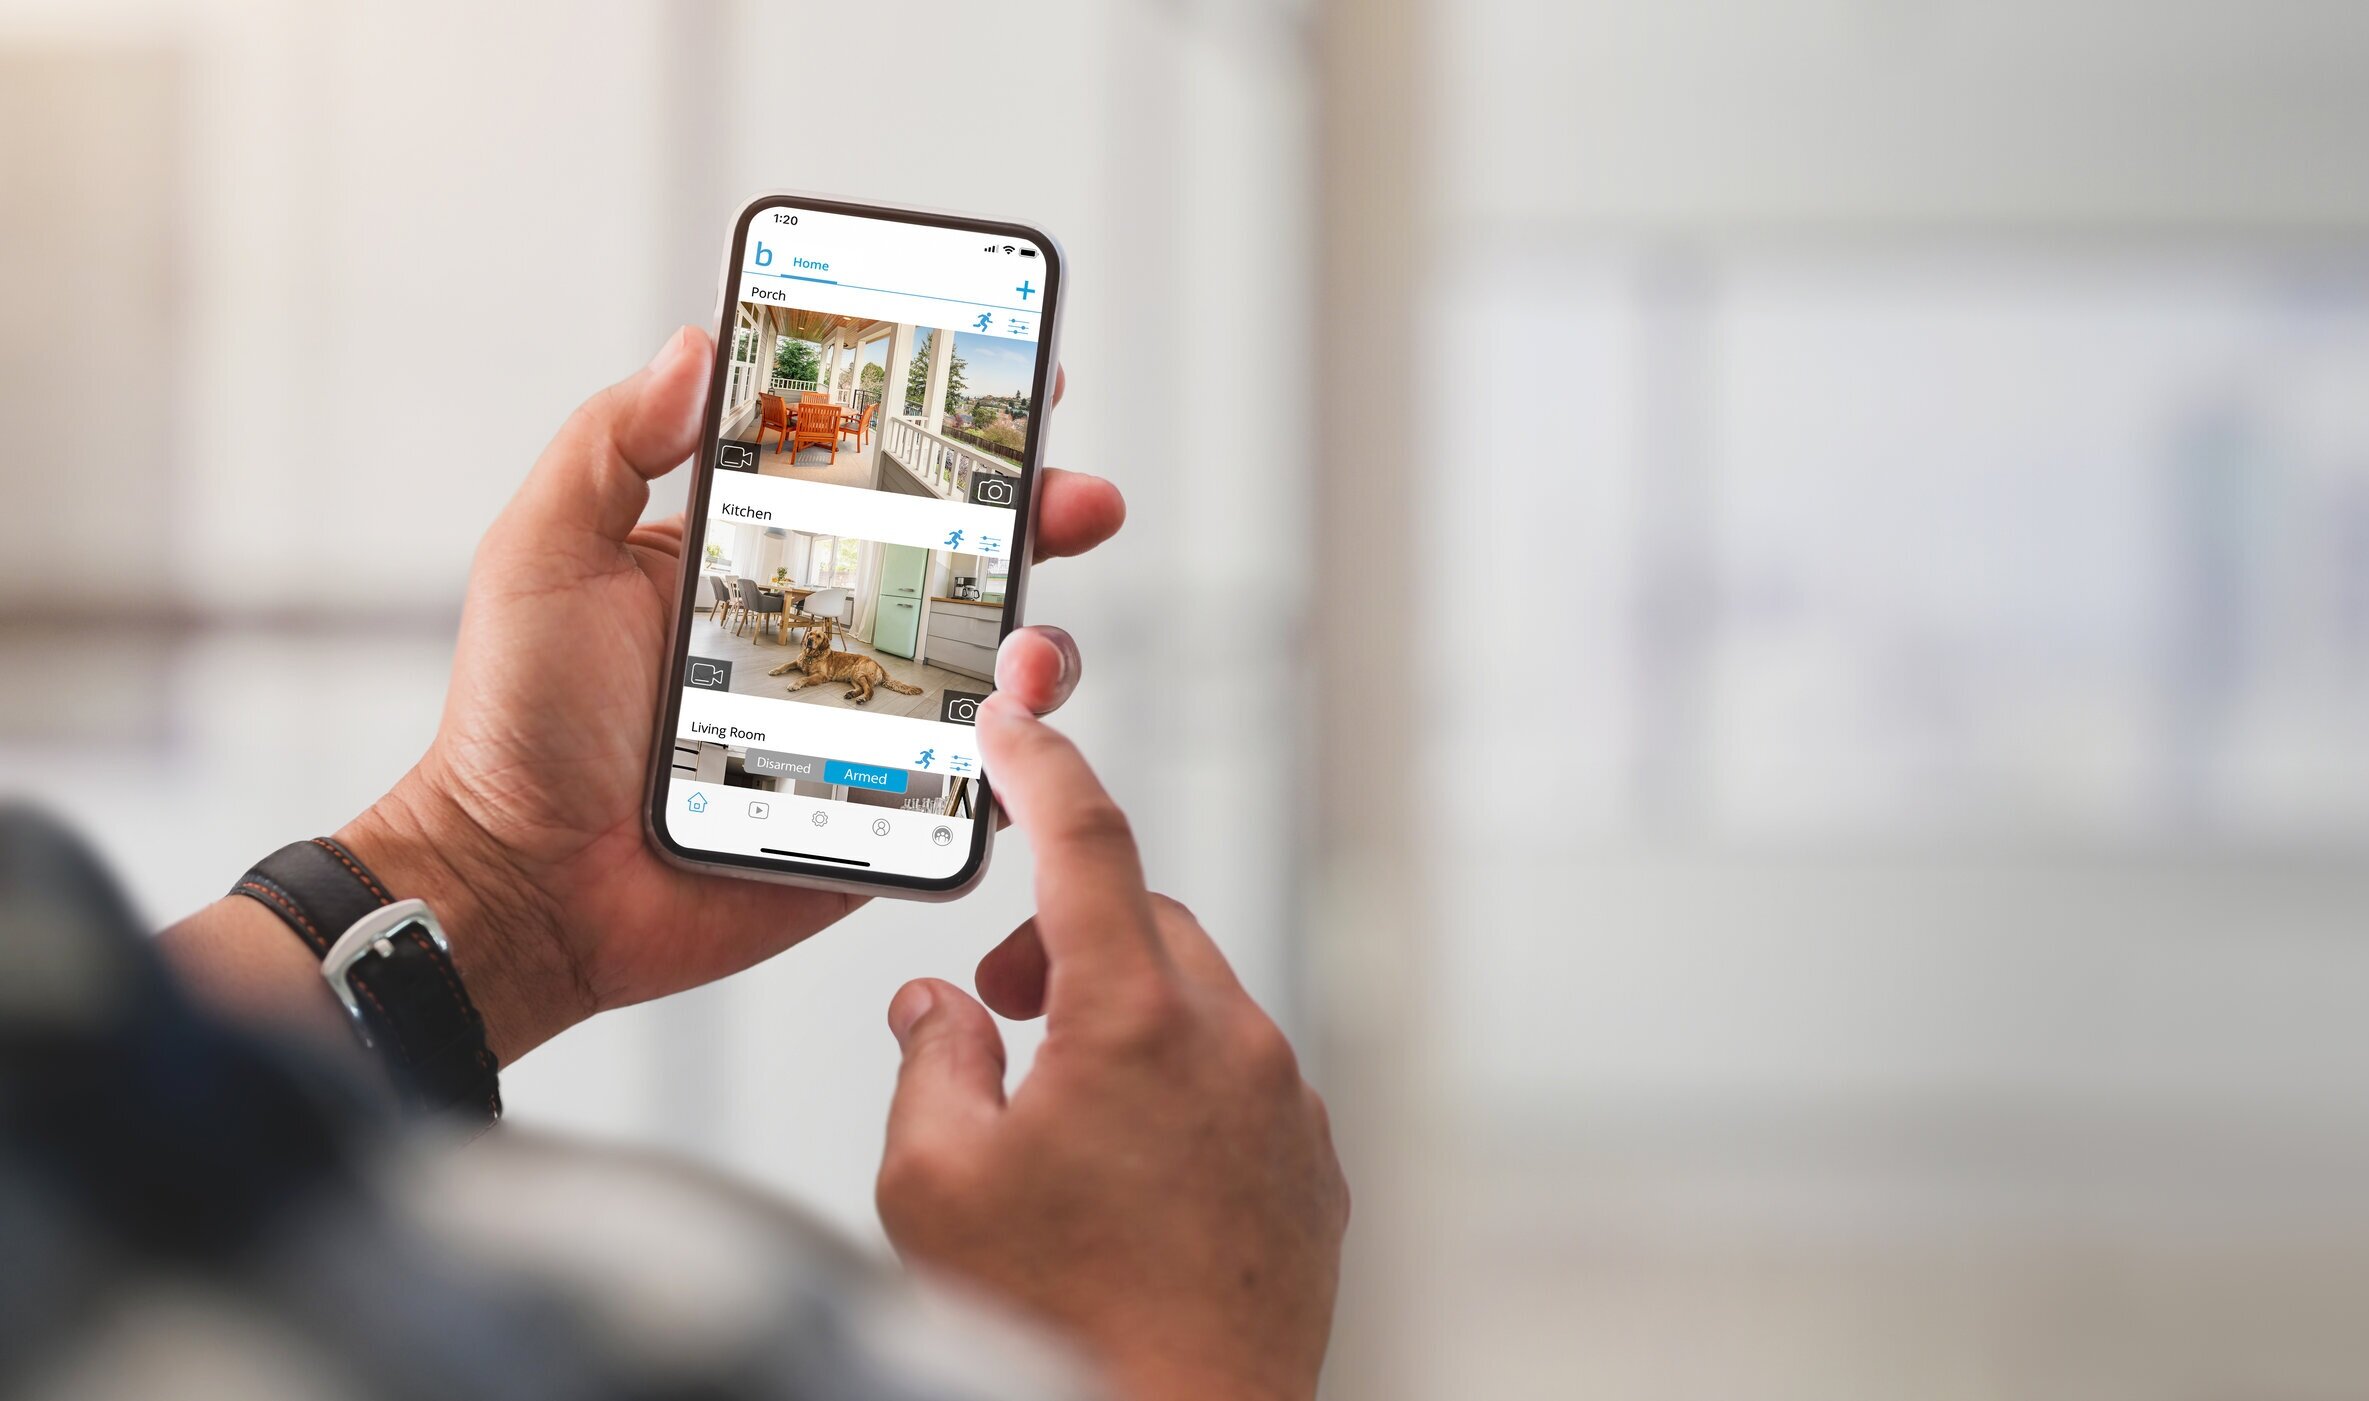 See, hear, and speak from anywhere - The Blink Home Monitor app connects your home to your phone so you can help protect what matters most. With multi-system support, you can use Blink to help watch over your home, vacation home, or business all at the same time. Plus, control multiple Blink systems in one app.